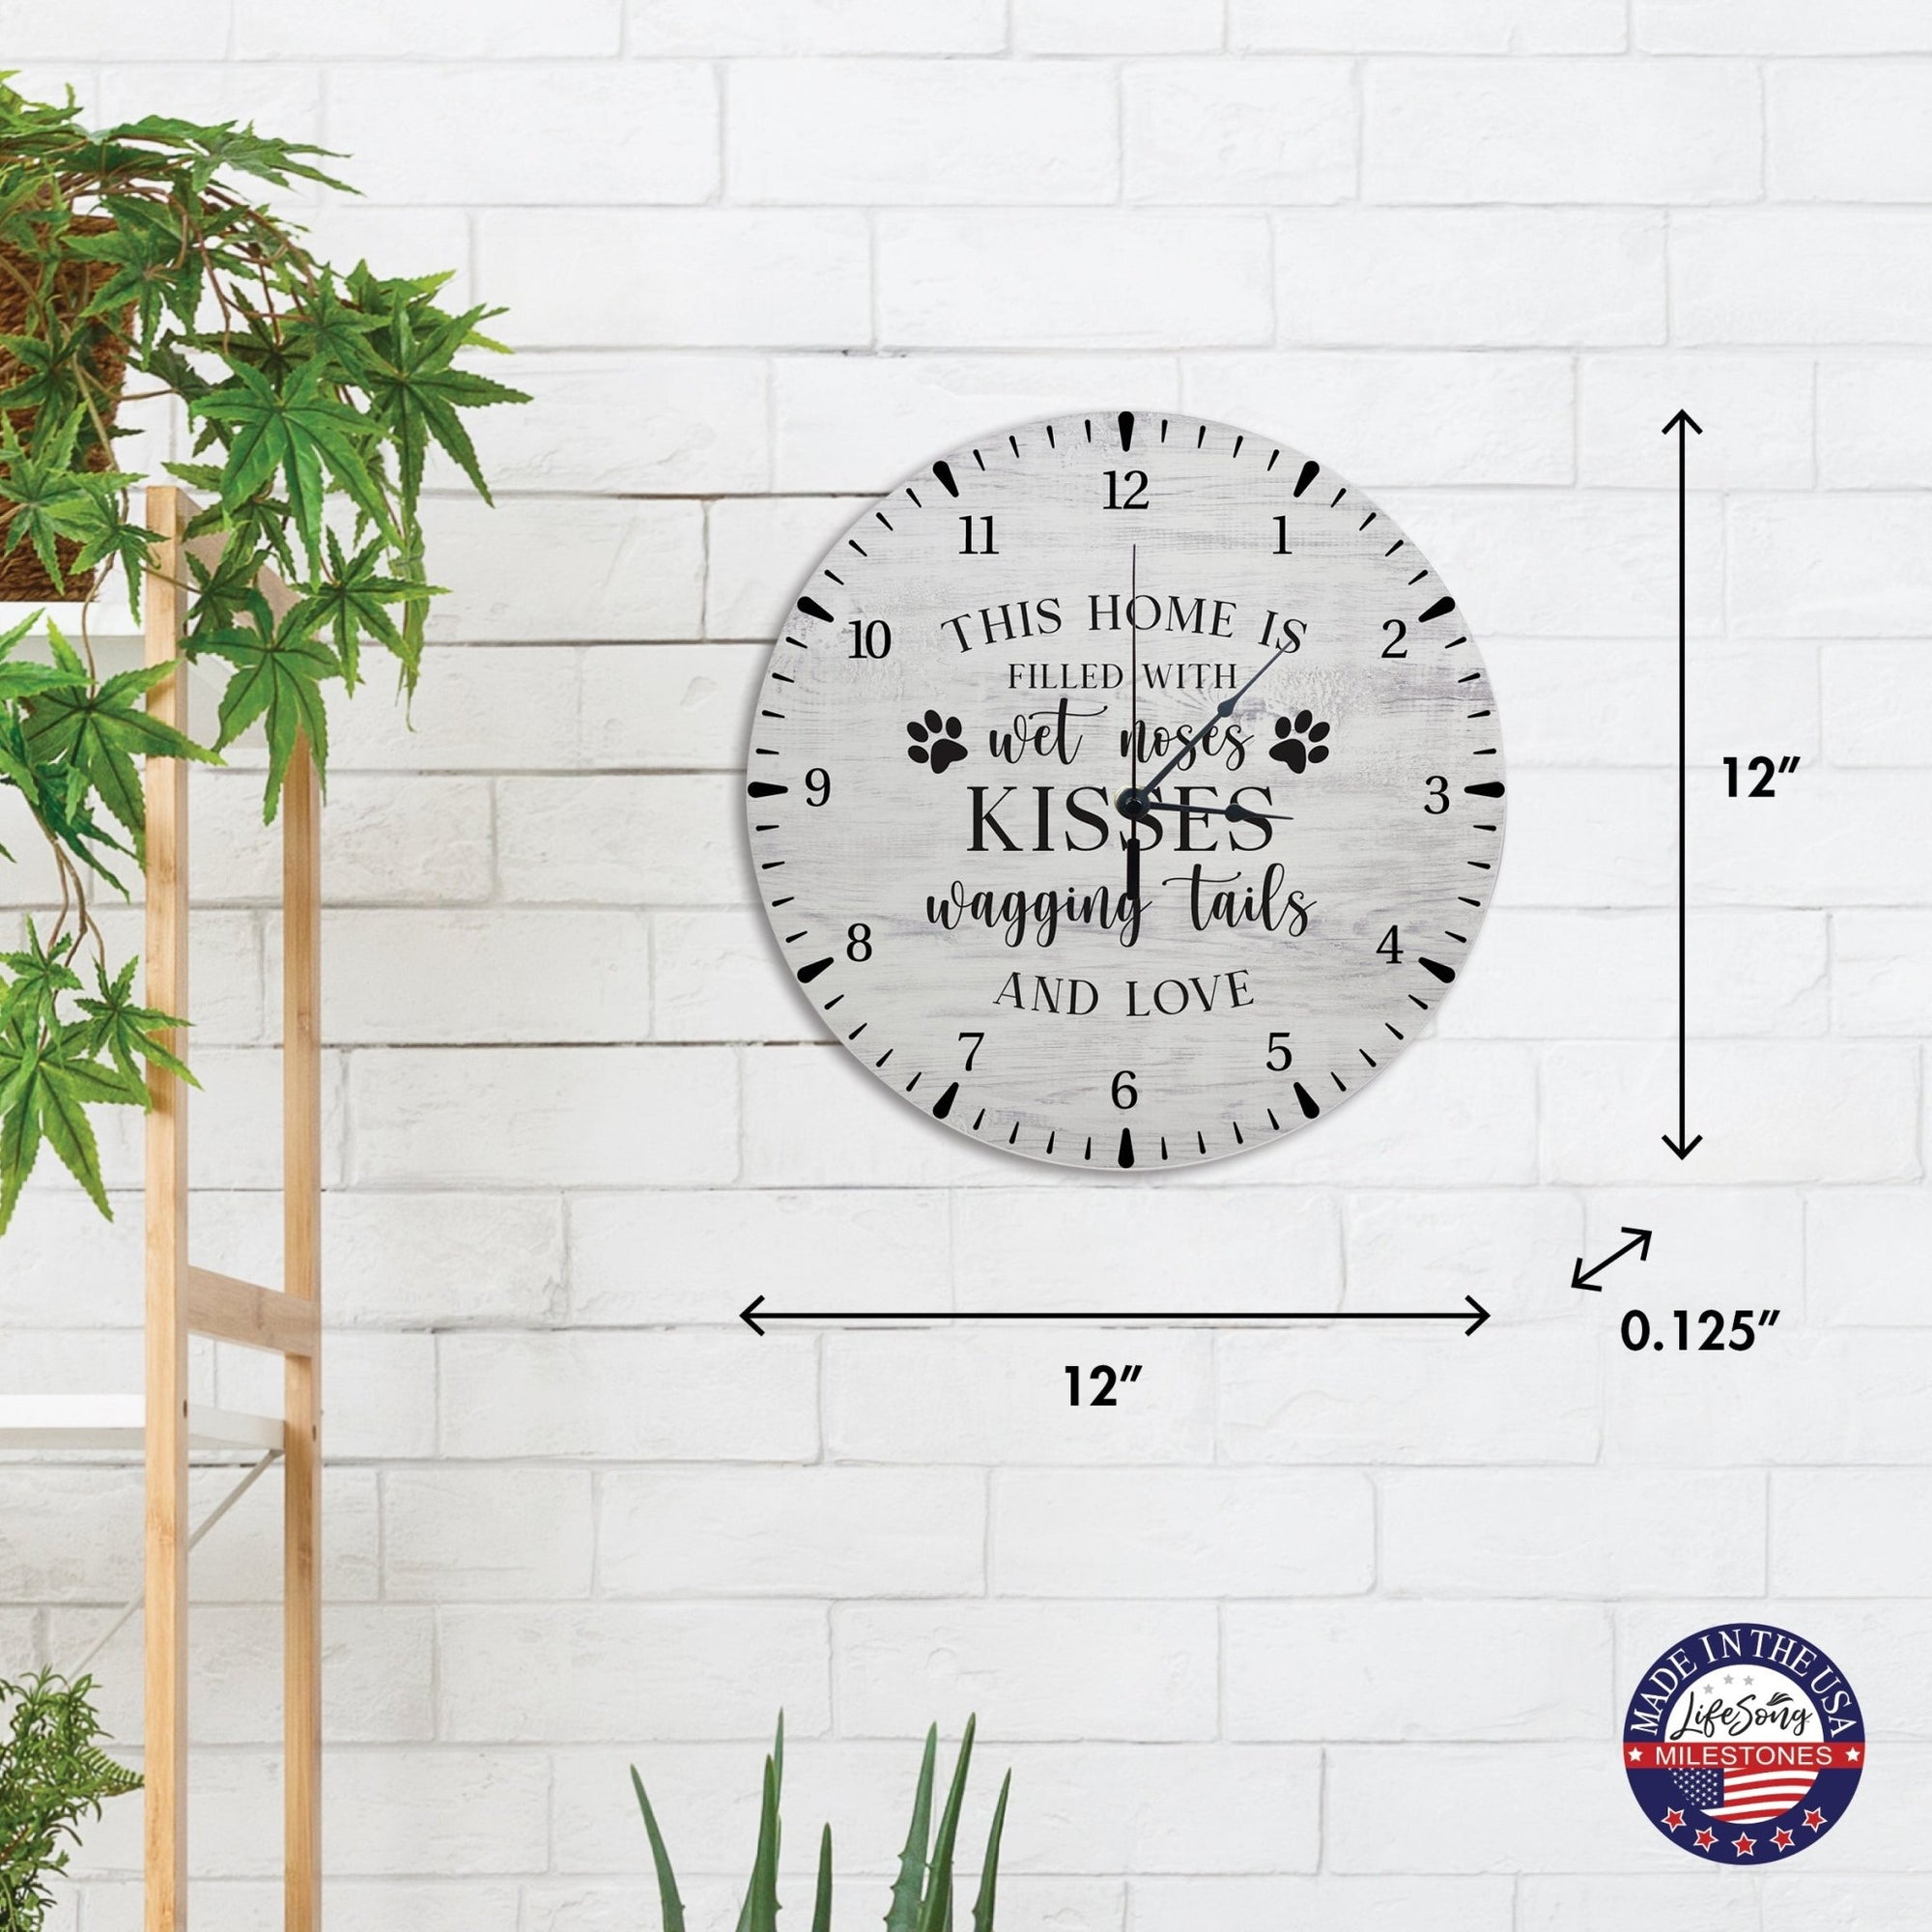 Minimalist Roman Numeral Wooden Clock For Walls Or Countertop Display For Pet Owners - This Home Is Filled - LifeSong Milestones